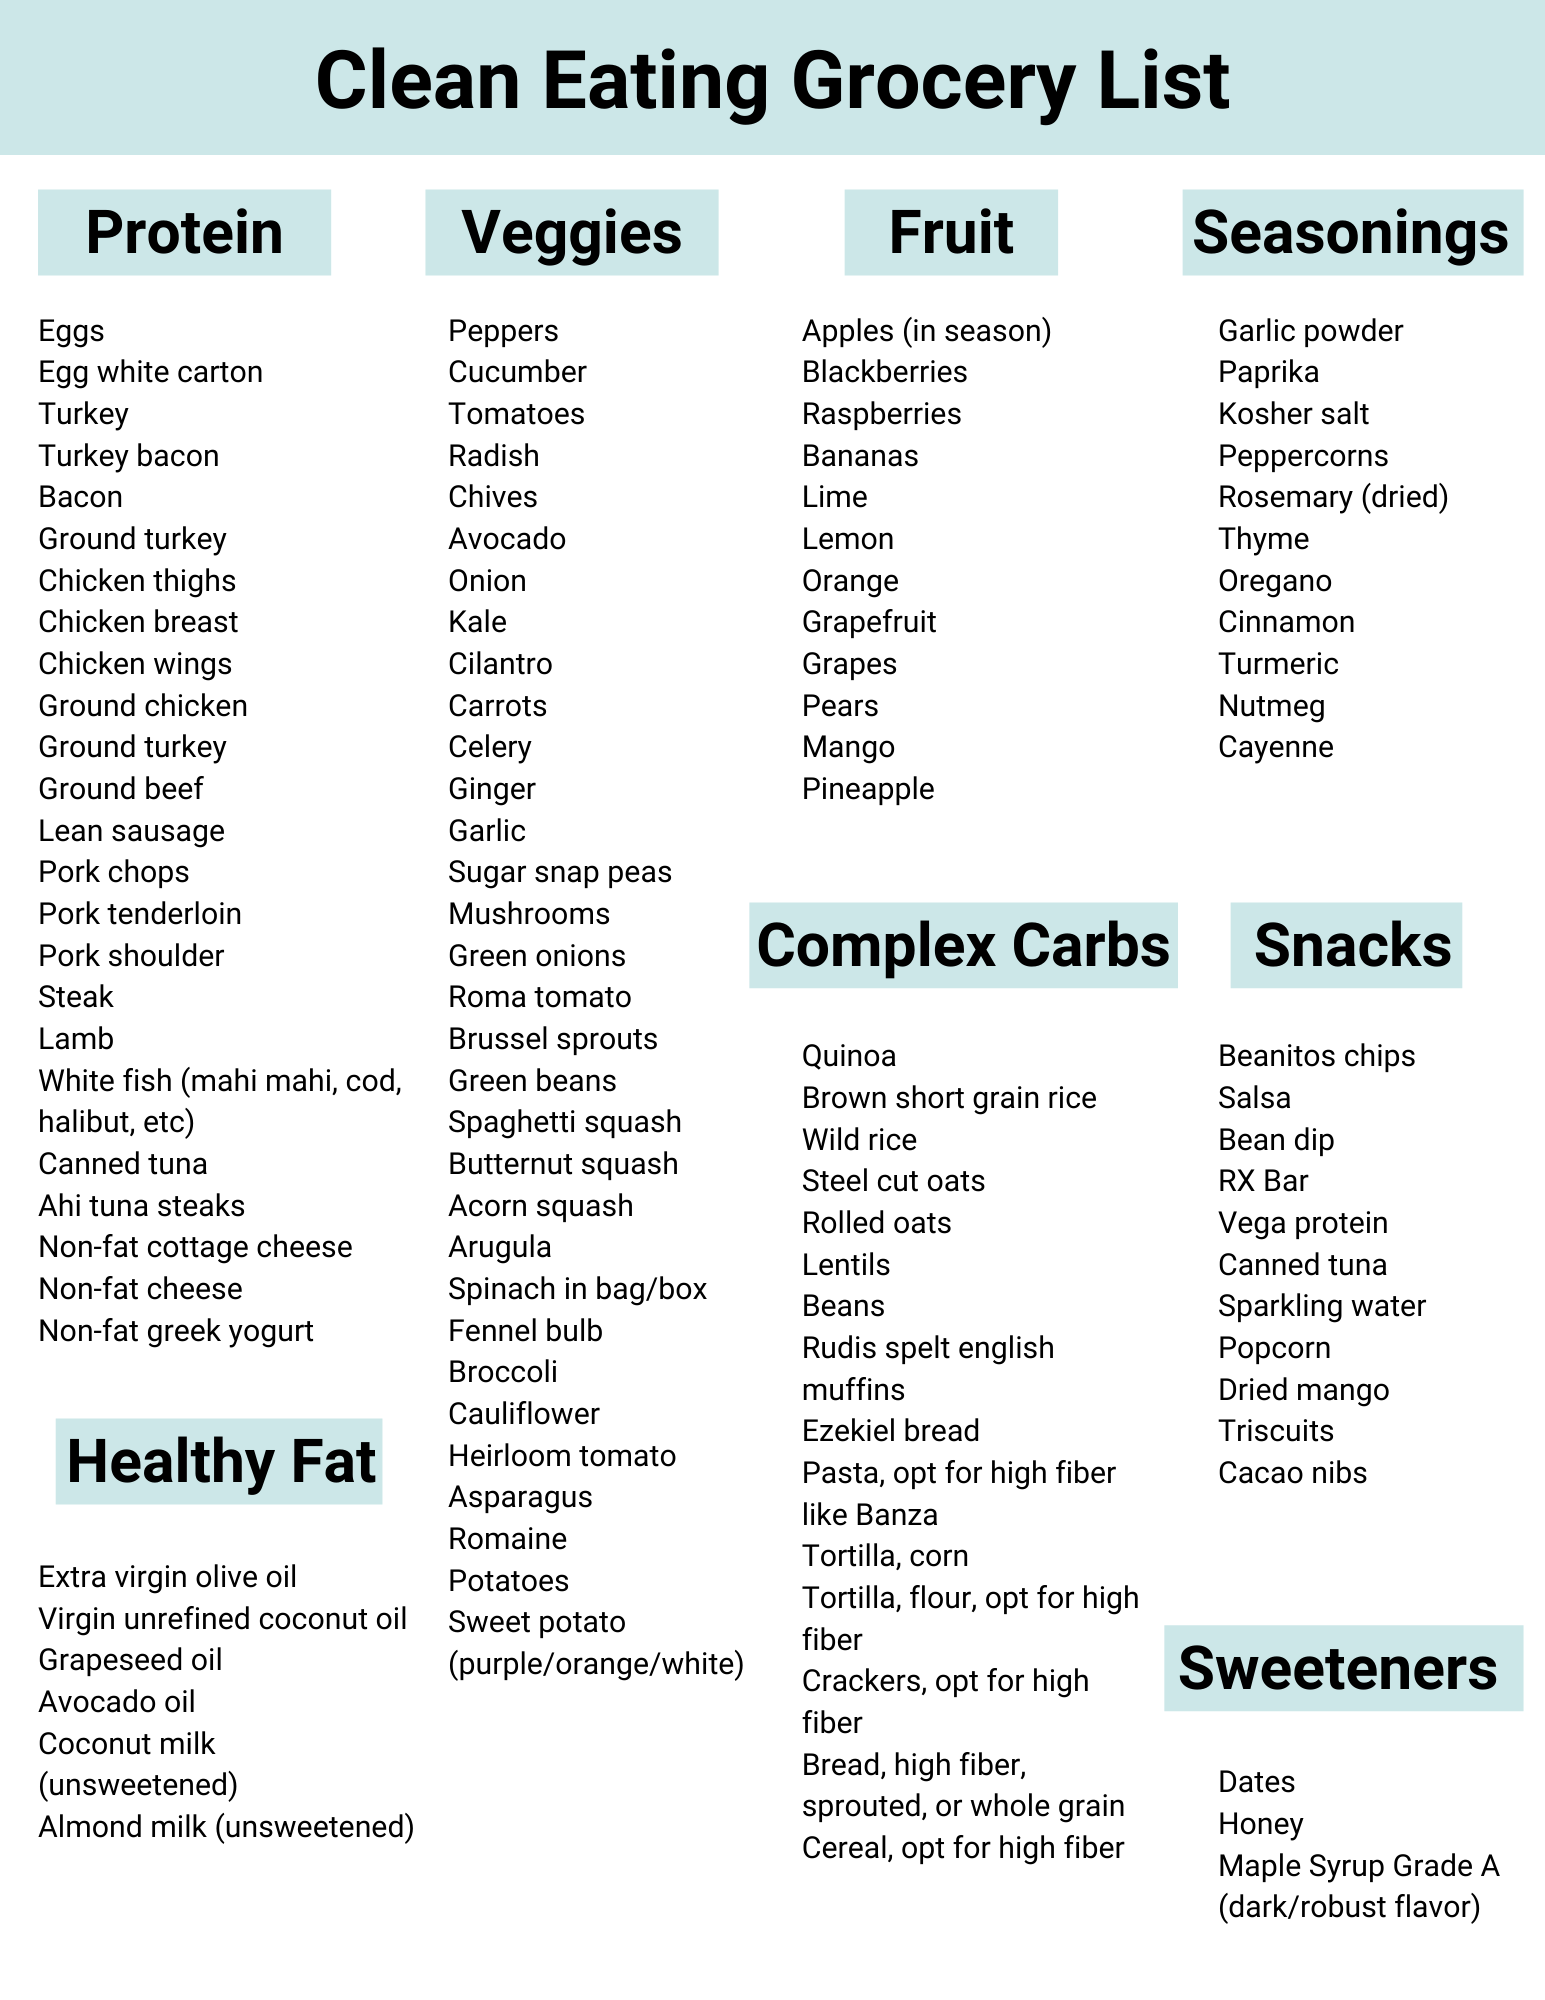 https://thebodybulletin.com/wp-content/uploads/2020/05/Clean-Eating-Grocery-List.png